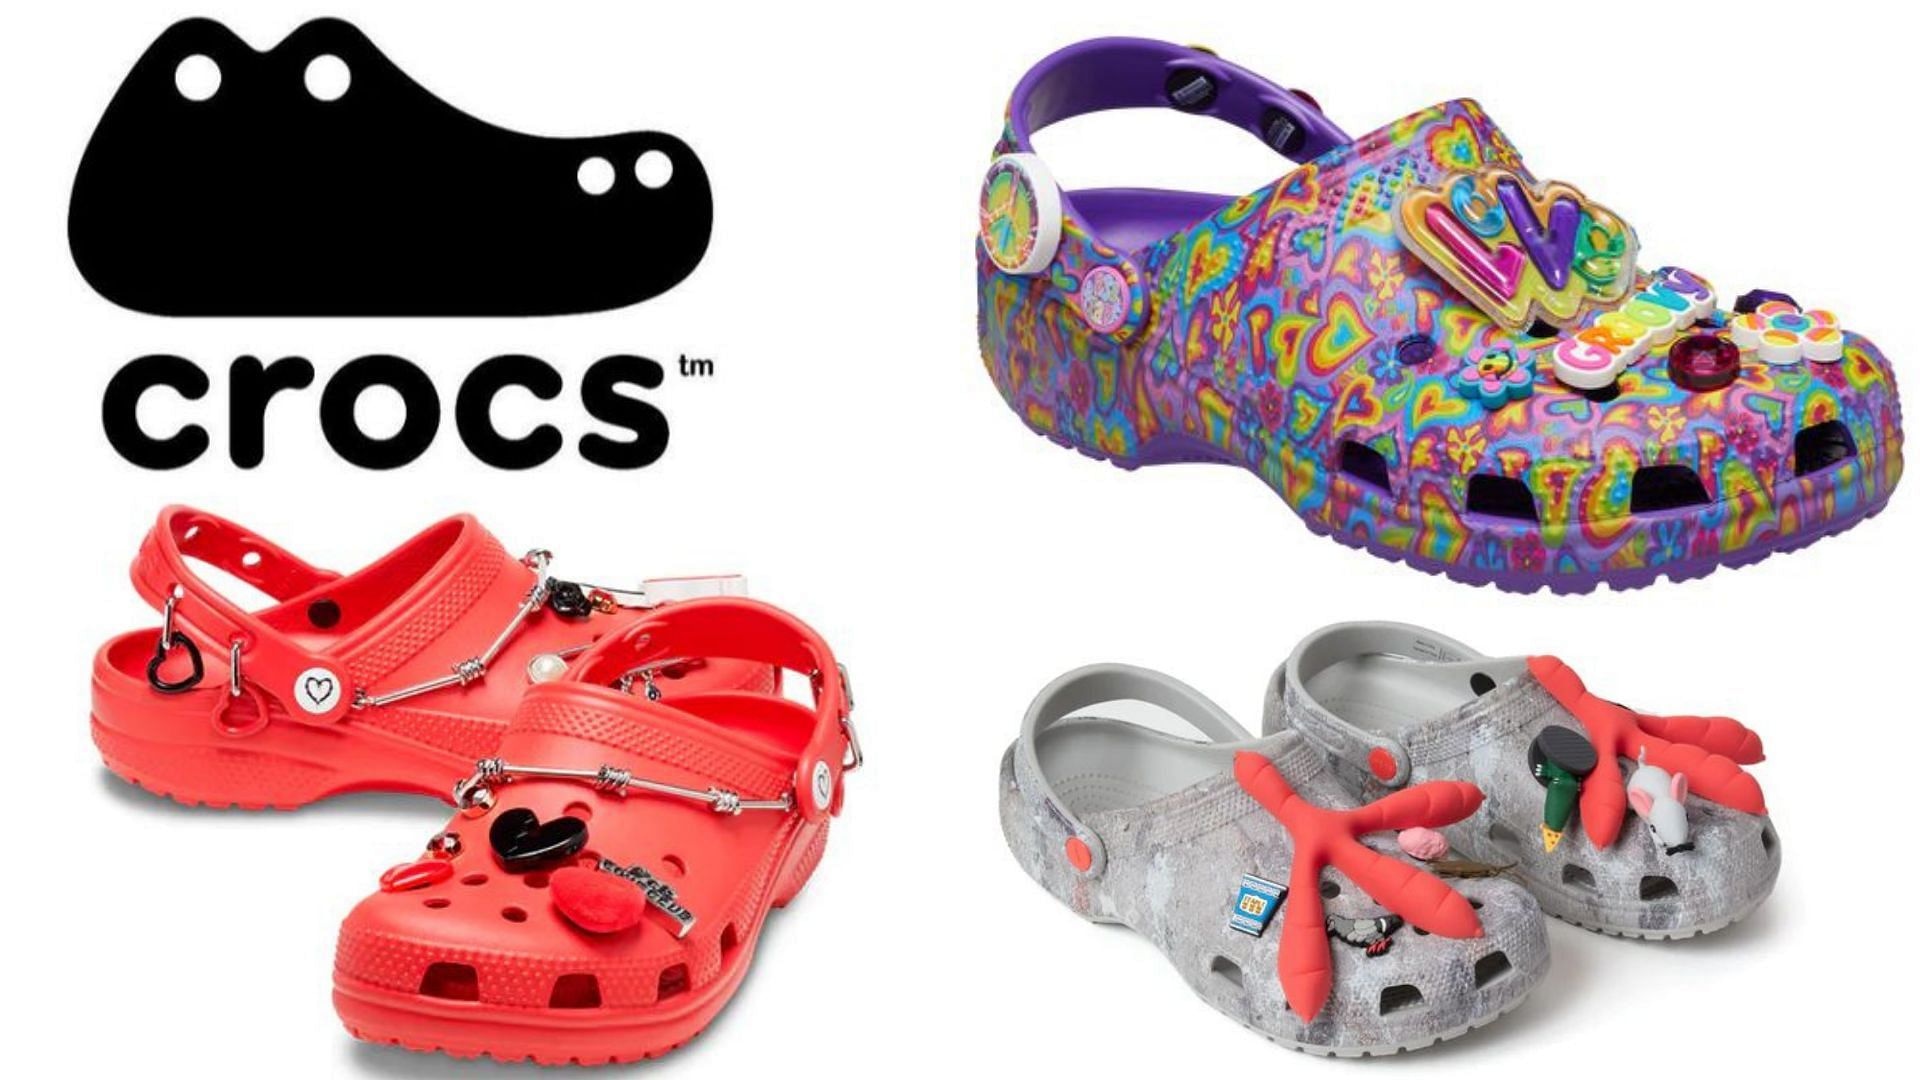 Crocs: Kids’ Lisa Frank clogs, Limited-edition clogs covered in Jibbitz charms. 1920x1080 Full HD Wallpaper.